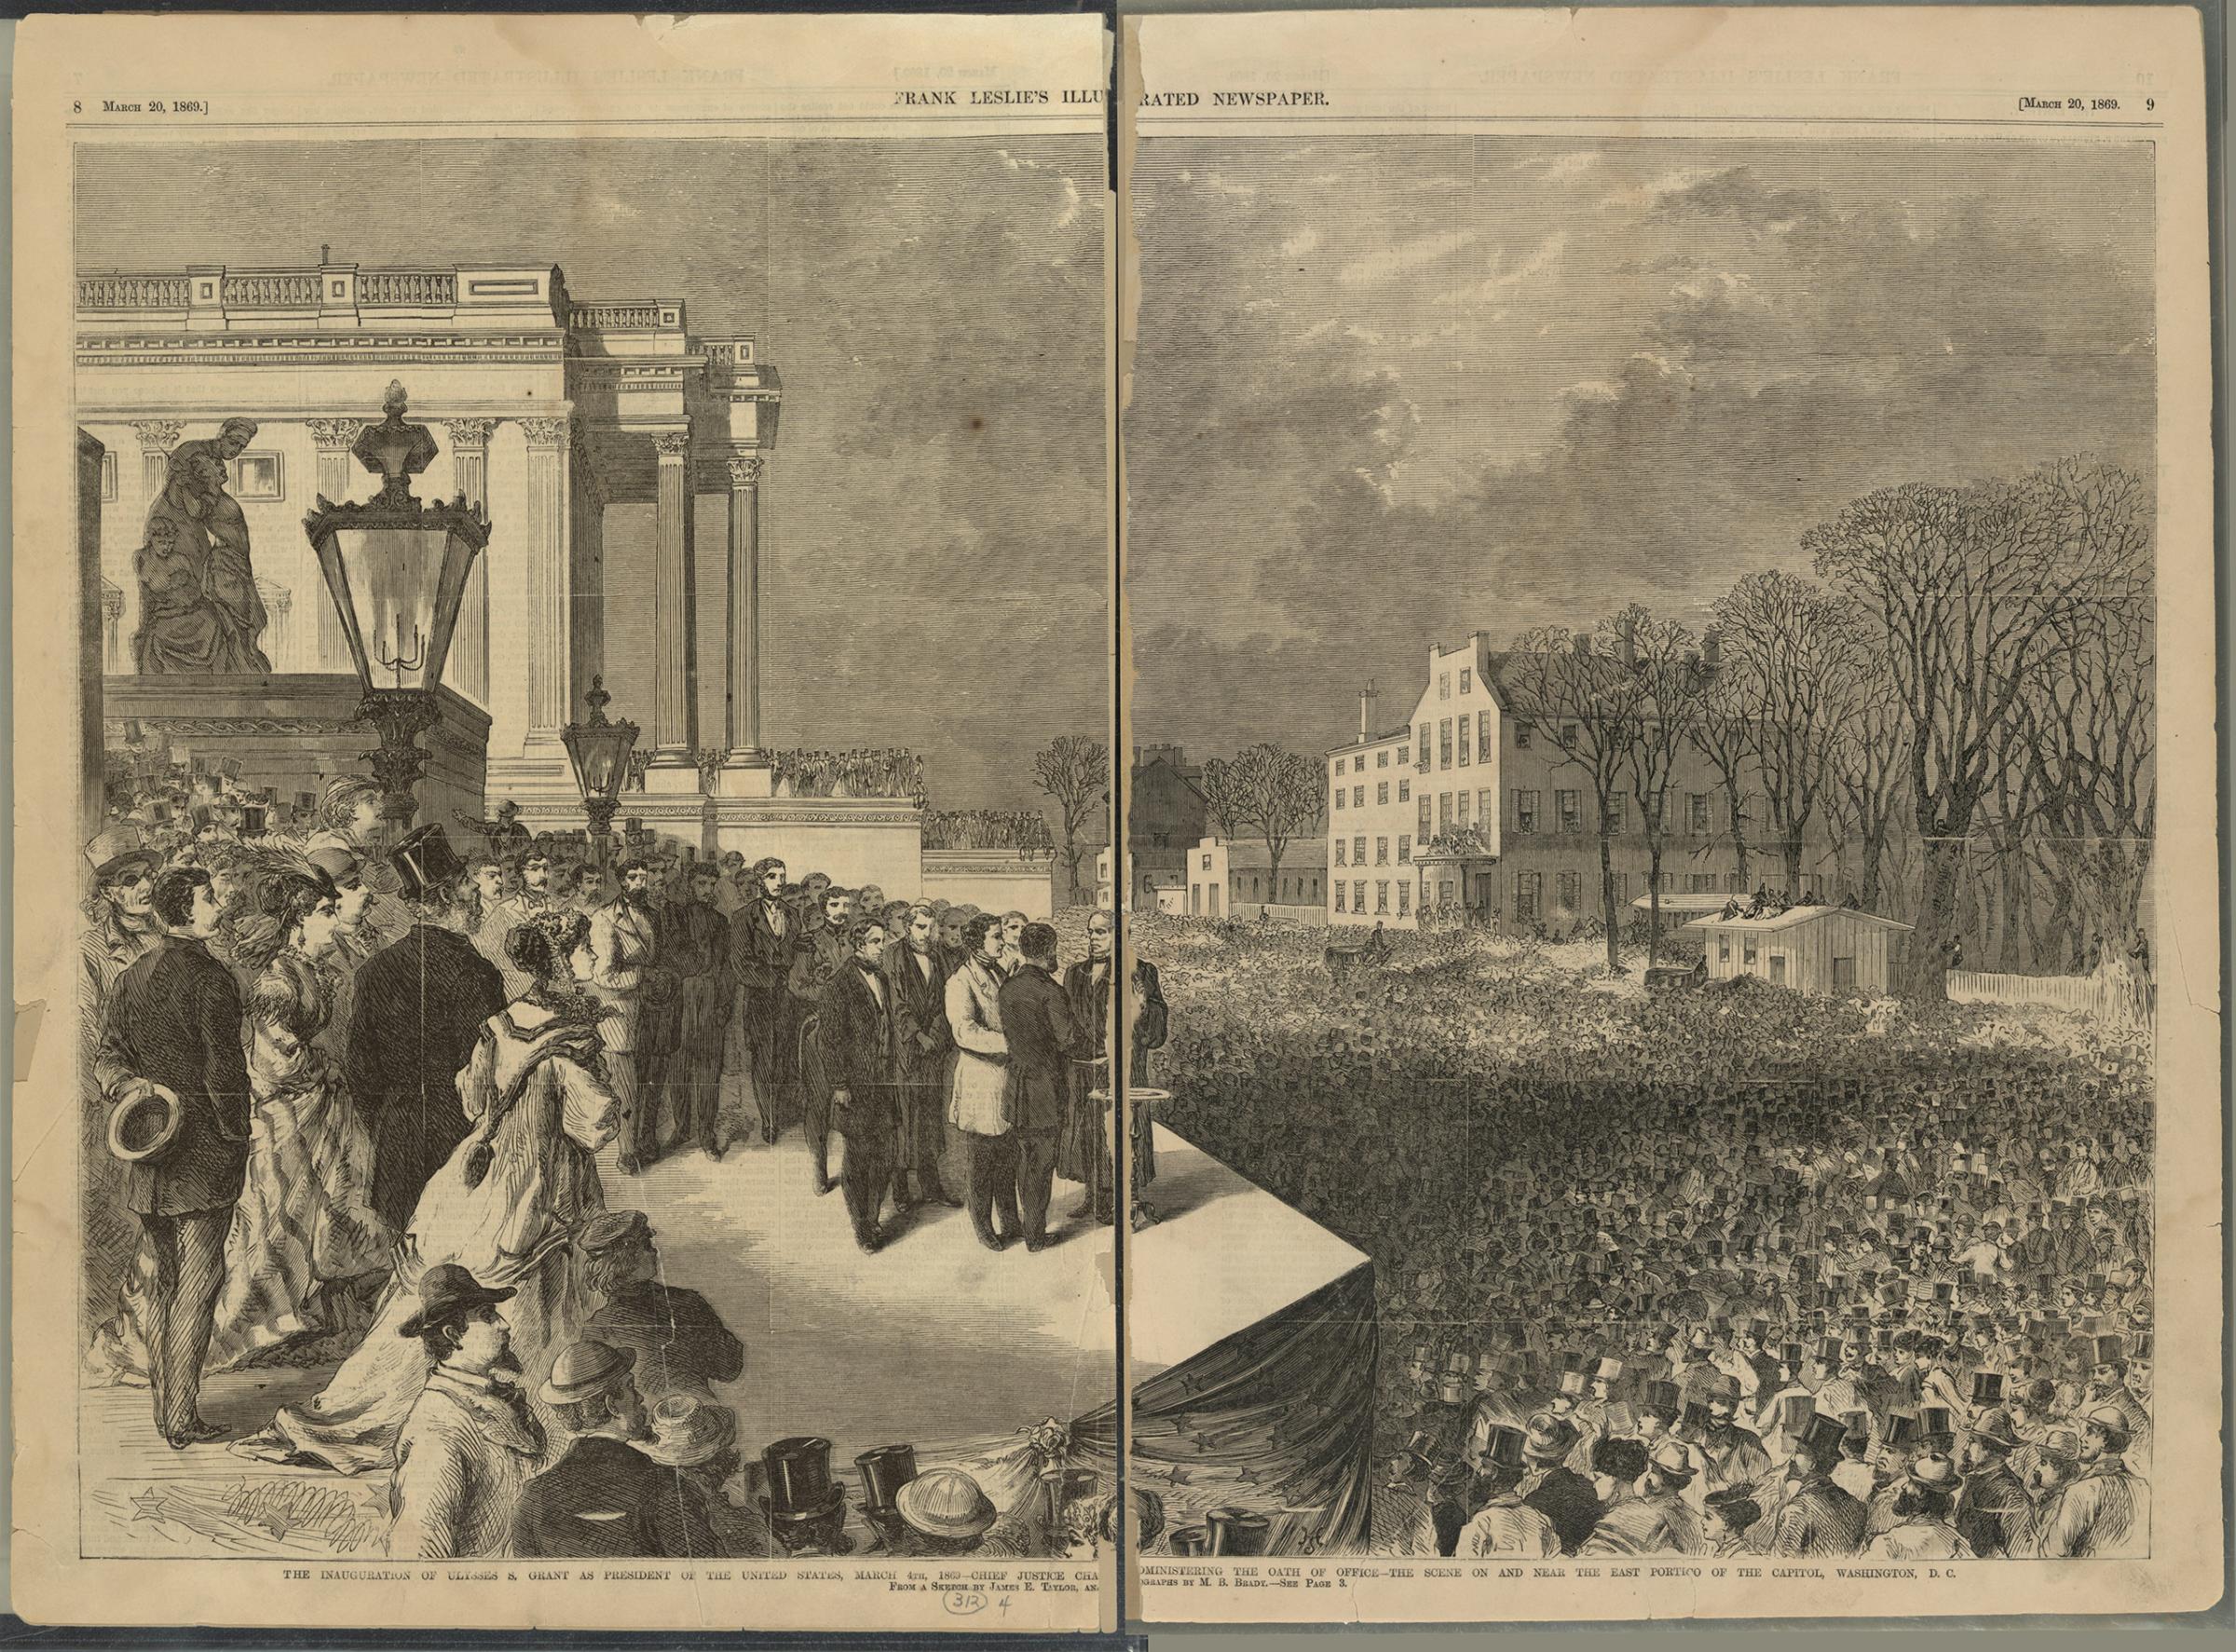 Ulysses S. Grant and Schuyler Colfax taking the oath of office administered by Chief Justice Salmon P. Chase on the east portico of the U.S. Capitol in Washington, D.C., March 4th 1869, before a large crowd.